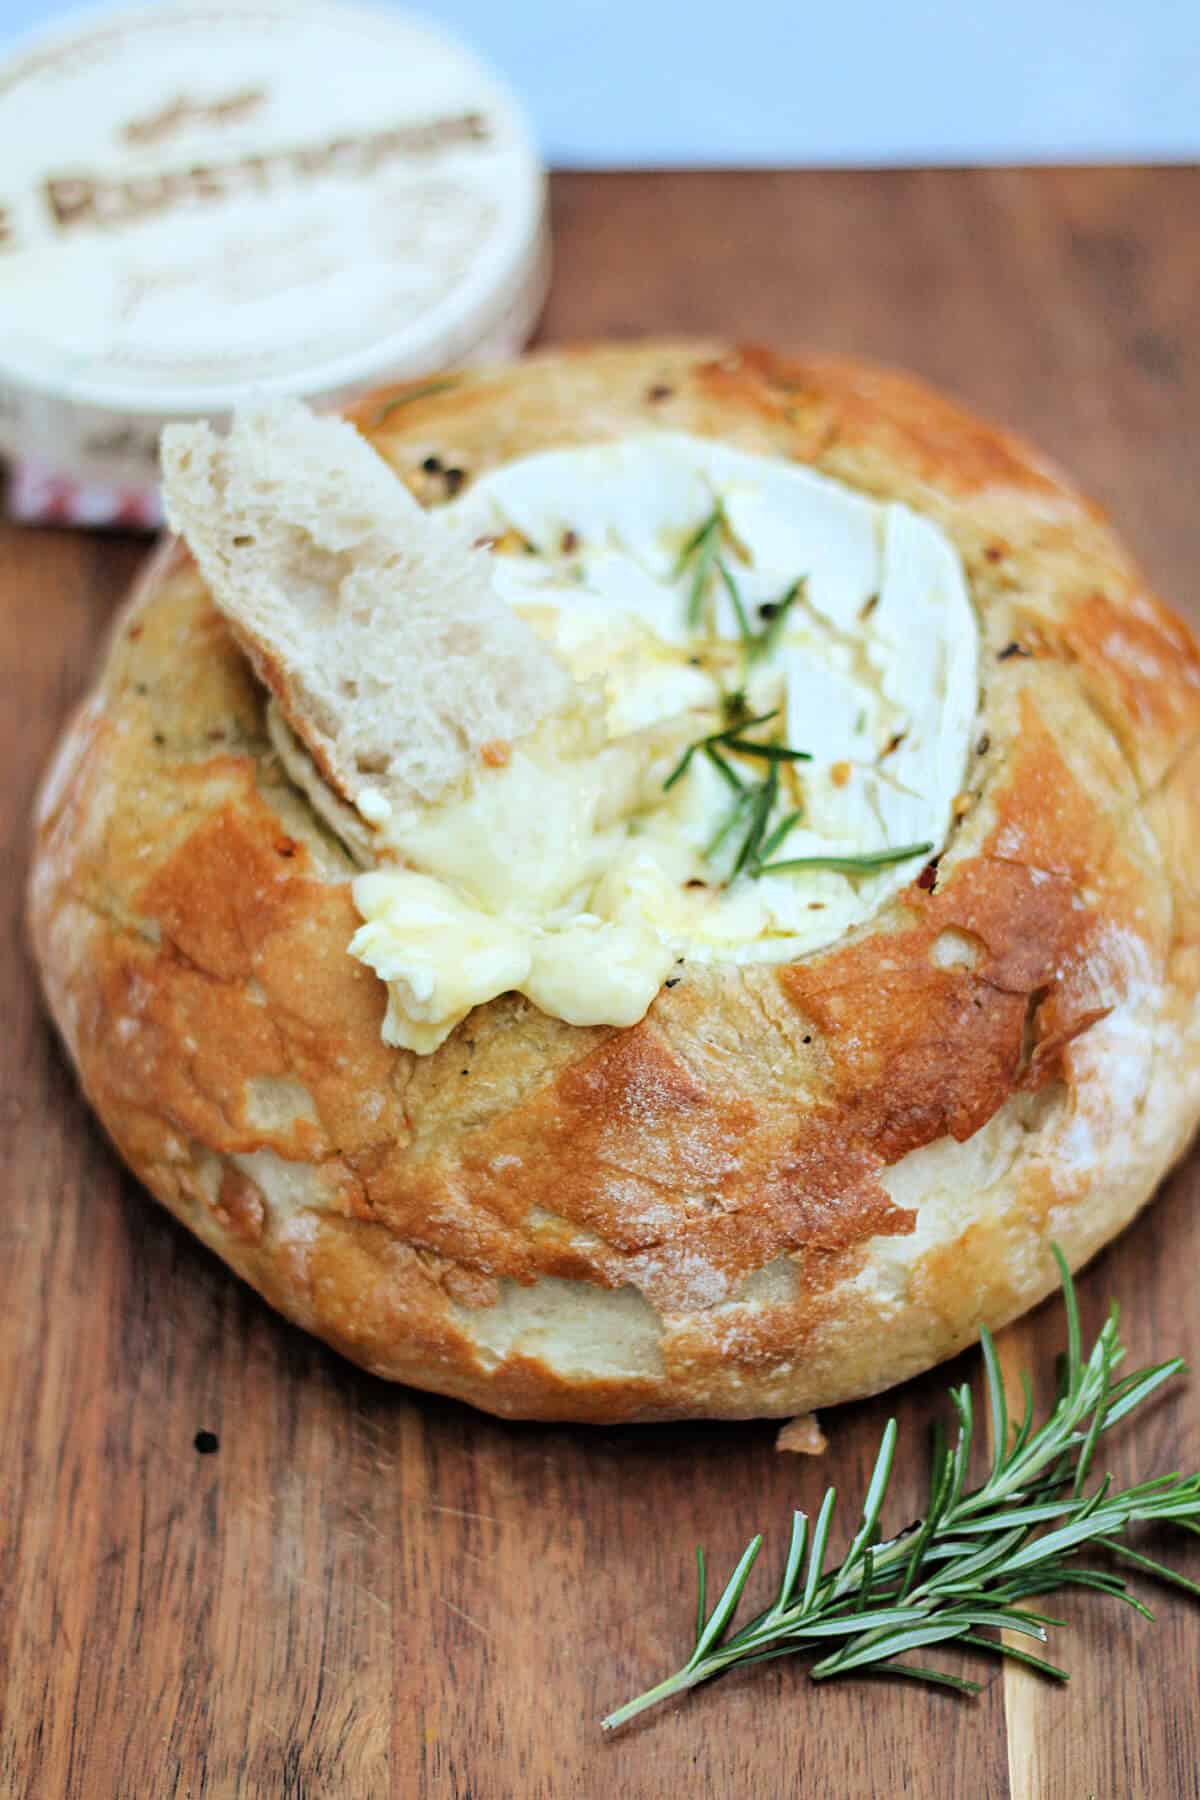 Baked camembert cheese in a bread bowl, with a piece of bread dipped in melting cheese.